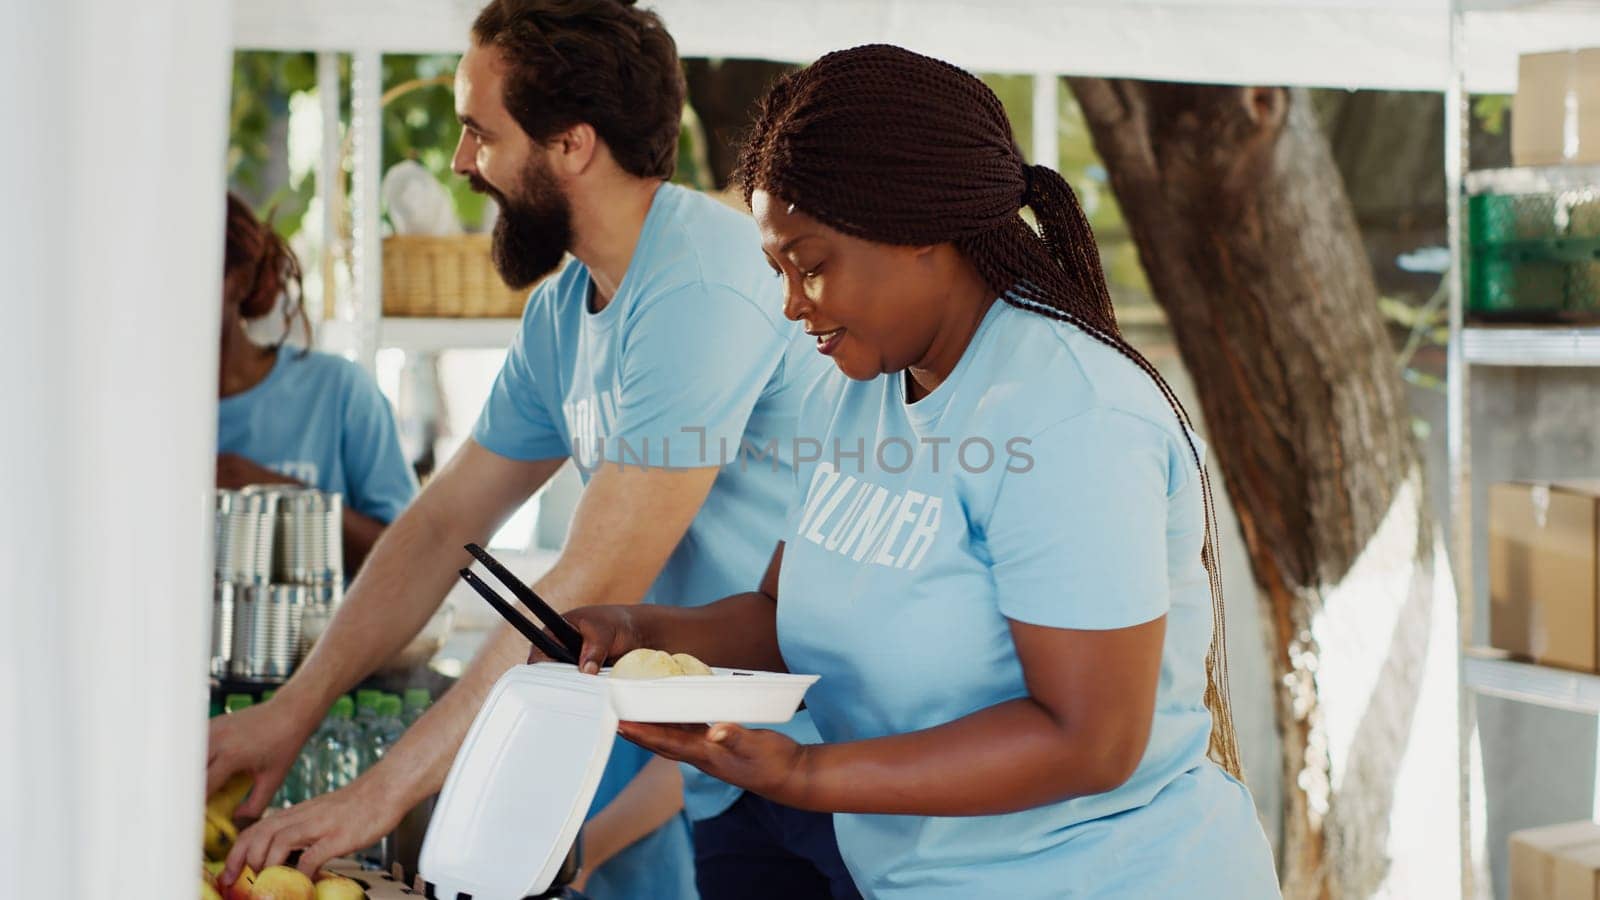 Black woman serving meals to underprivileged at community outreach event. Charity workers at a food drive distributing nutritious foods and essentials to the poor and homeless. Side-view, tripod shot.